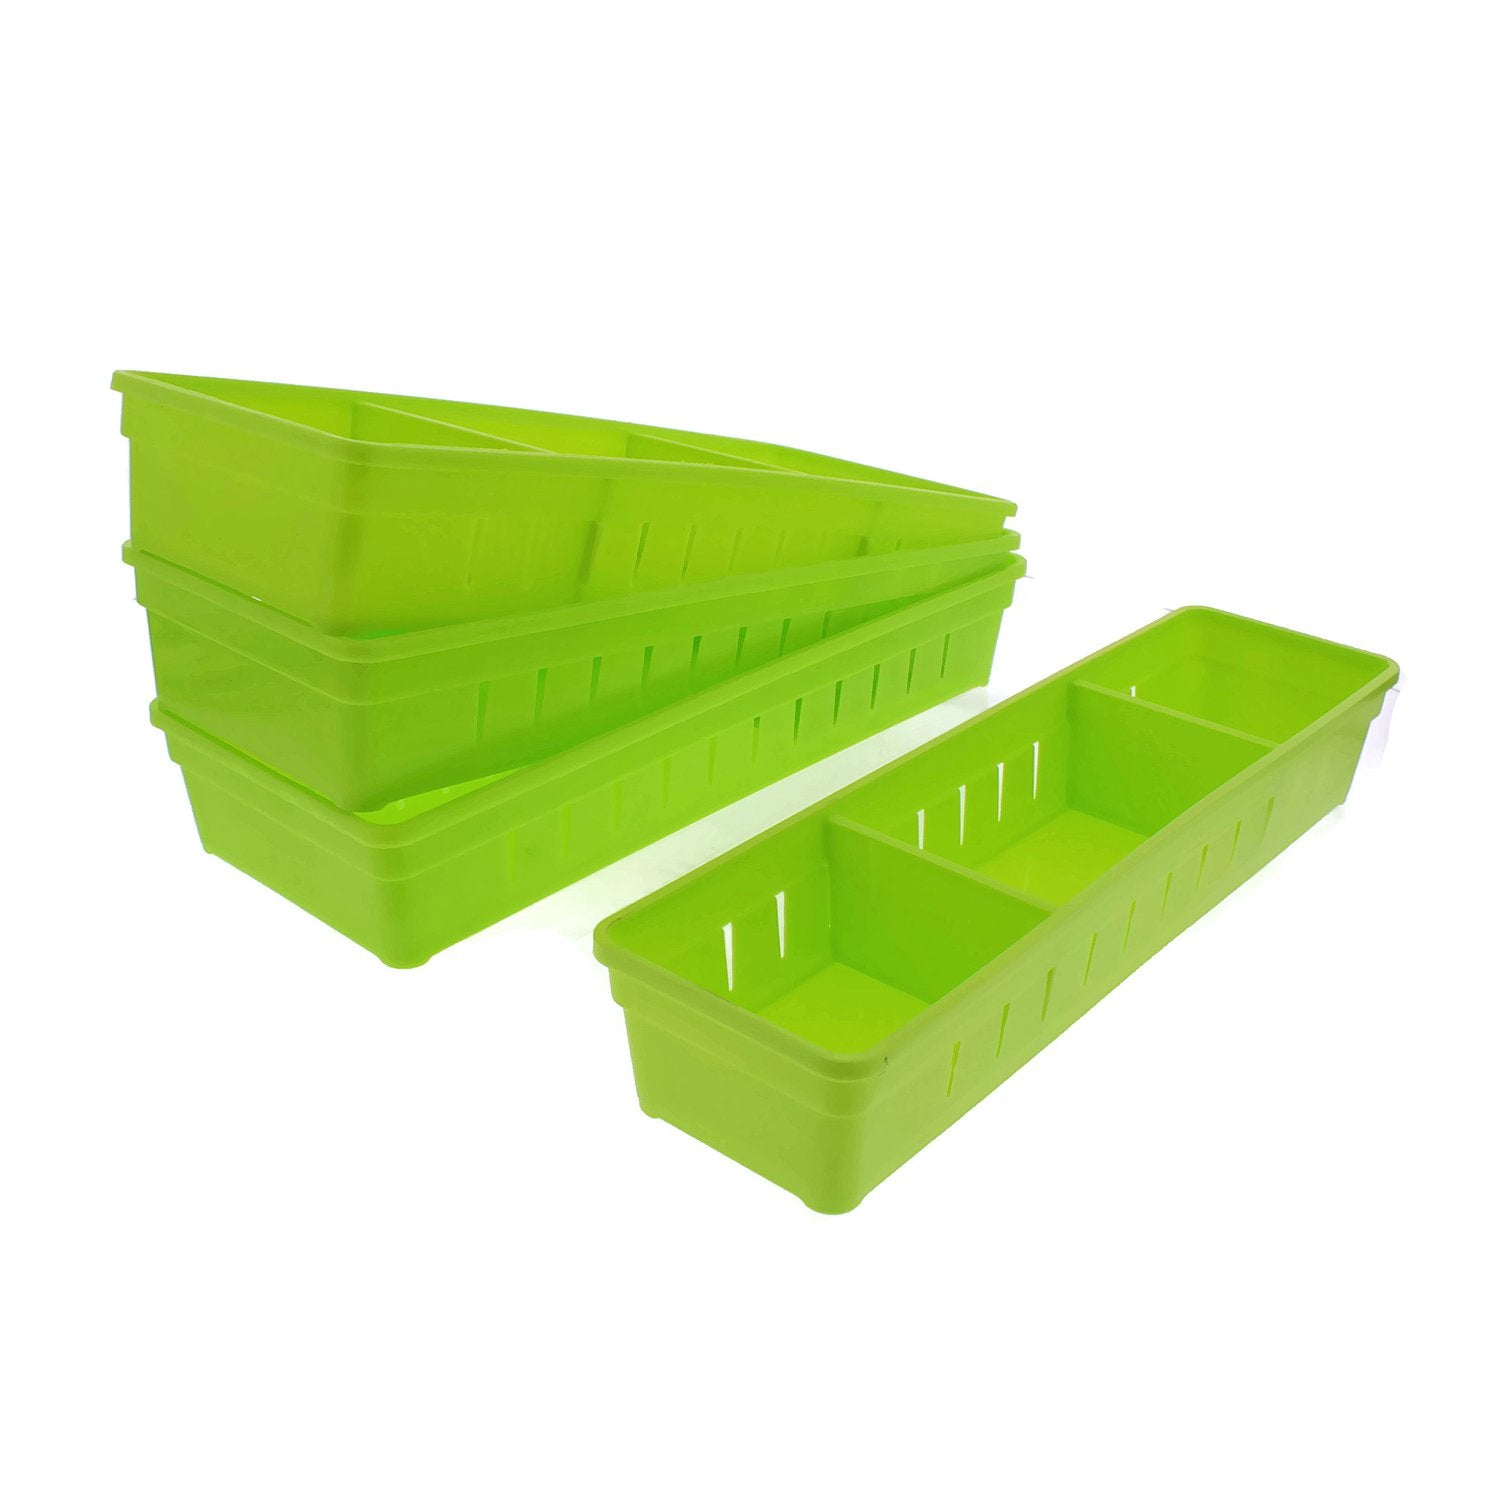 Cheftor Plastic Storage Drawers Drawer Organizers with Dividers for Stationery, Makeup, Silverware, set of 4 (Green)